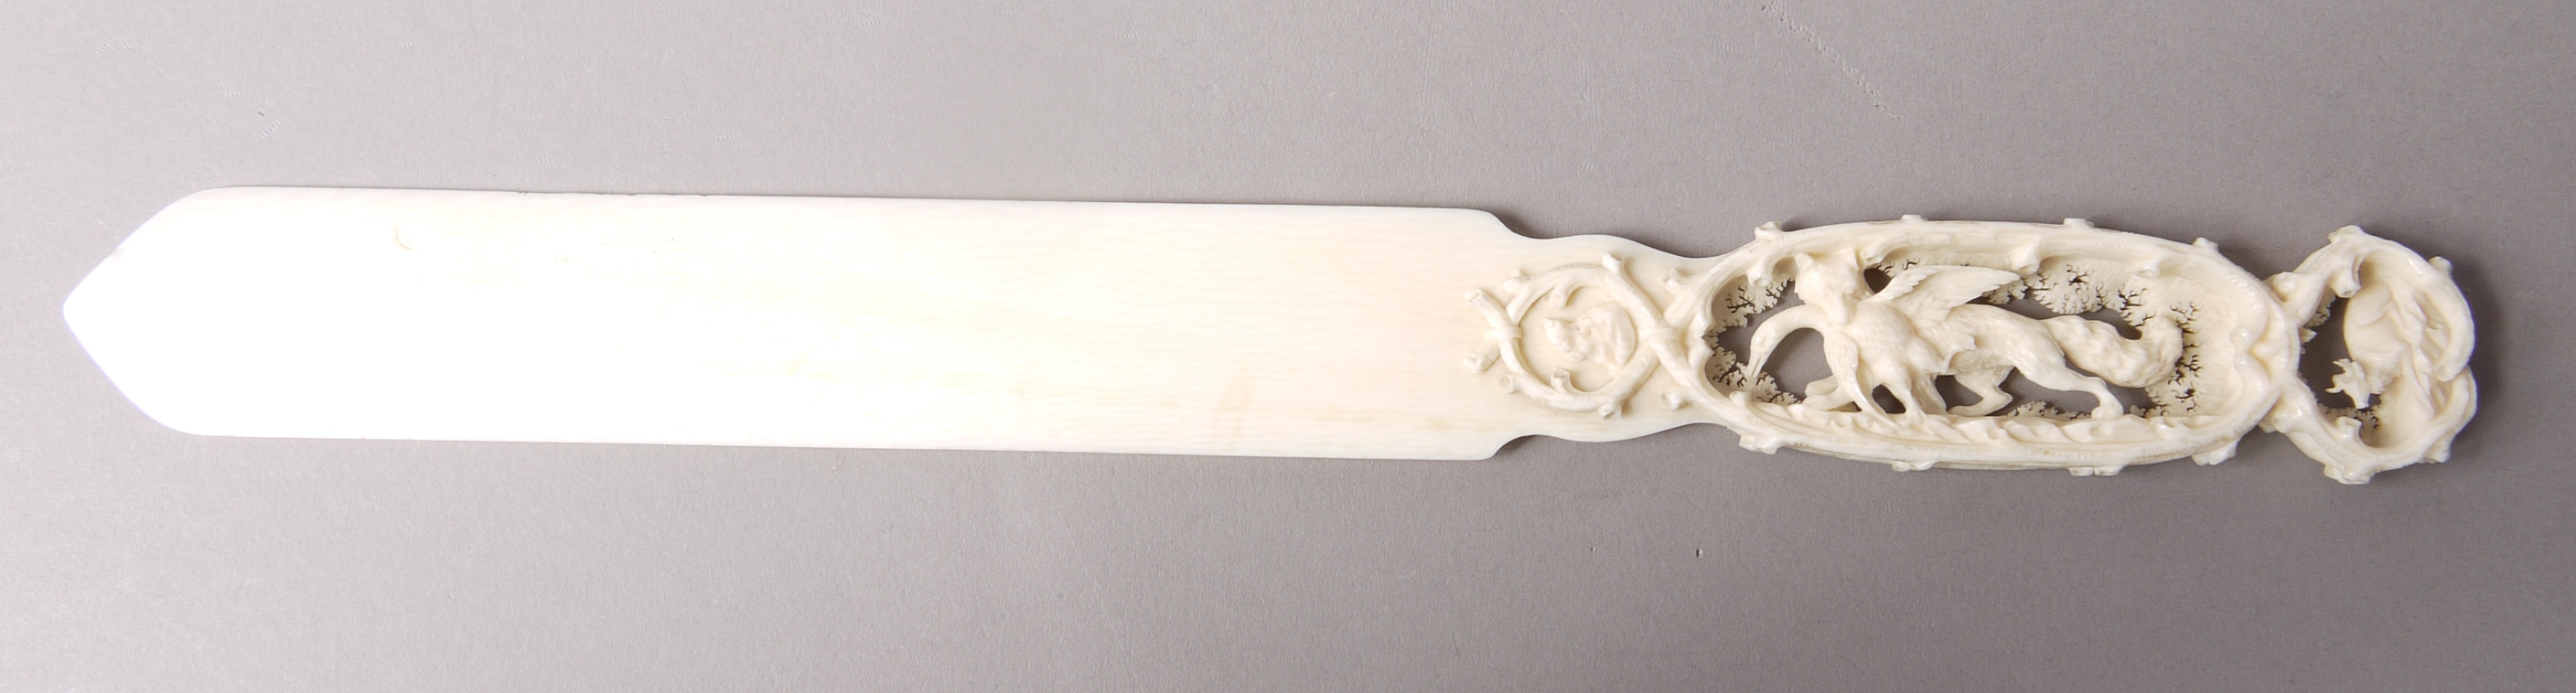 AN AUSTRIAN CARVED IVORY PAGE TURNER, c.